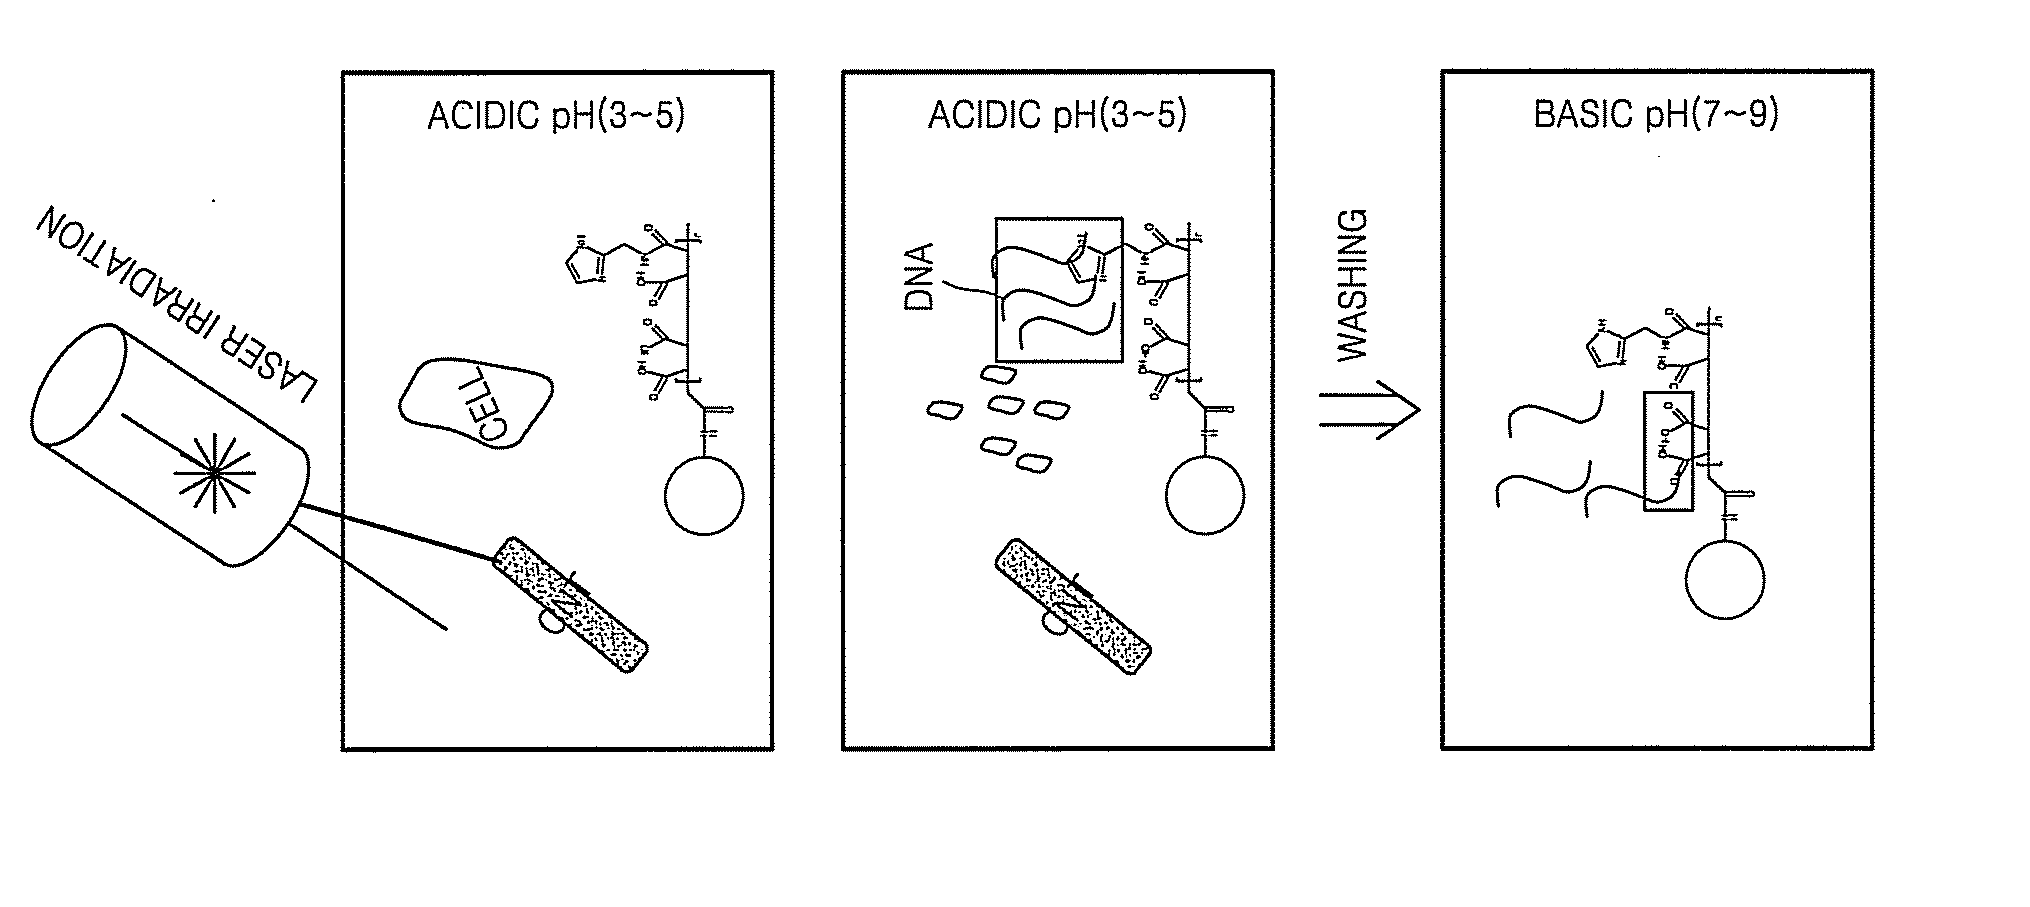 Method and apparatus for isolating nucleic acids from a cell using carbon nanotubes and silica beads